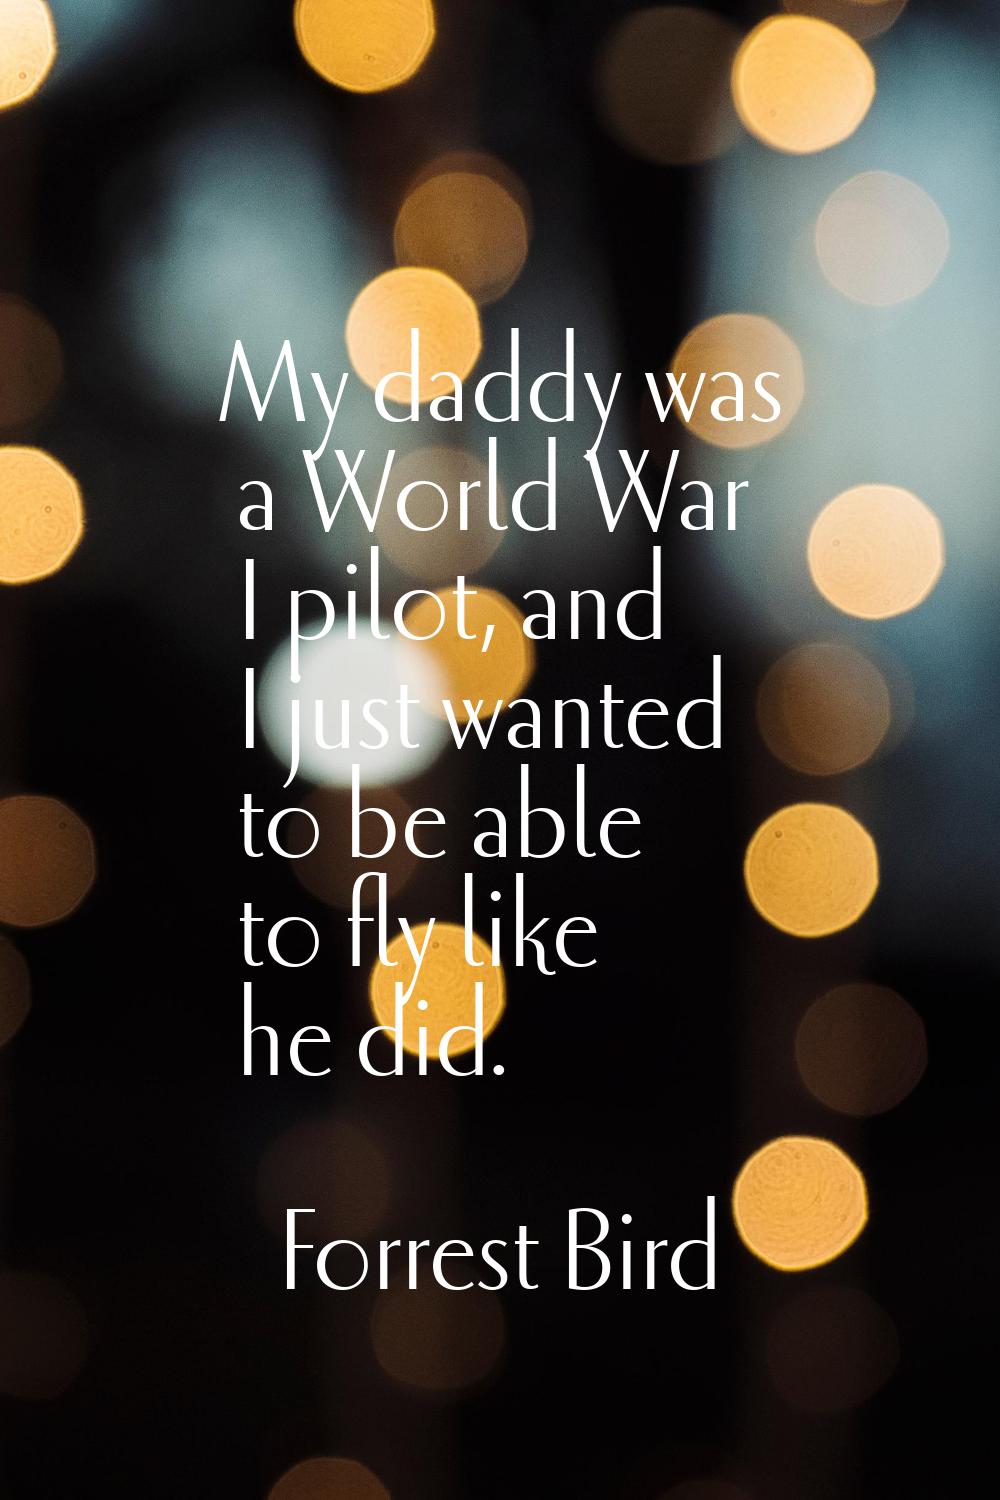 My daddy was a World War I pilot, and I just wanted to be able to fly like he did.